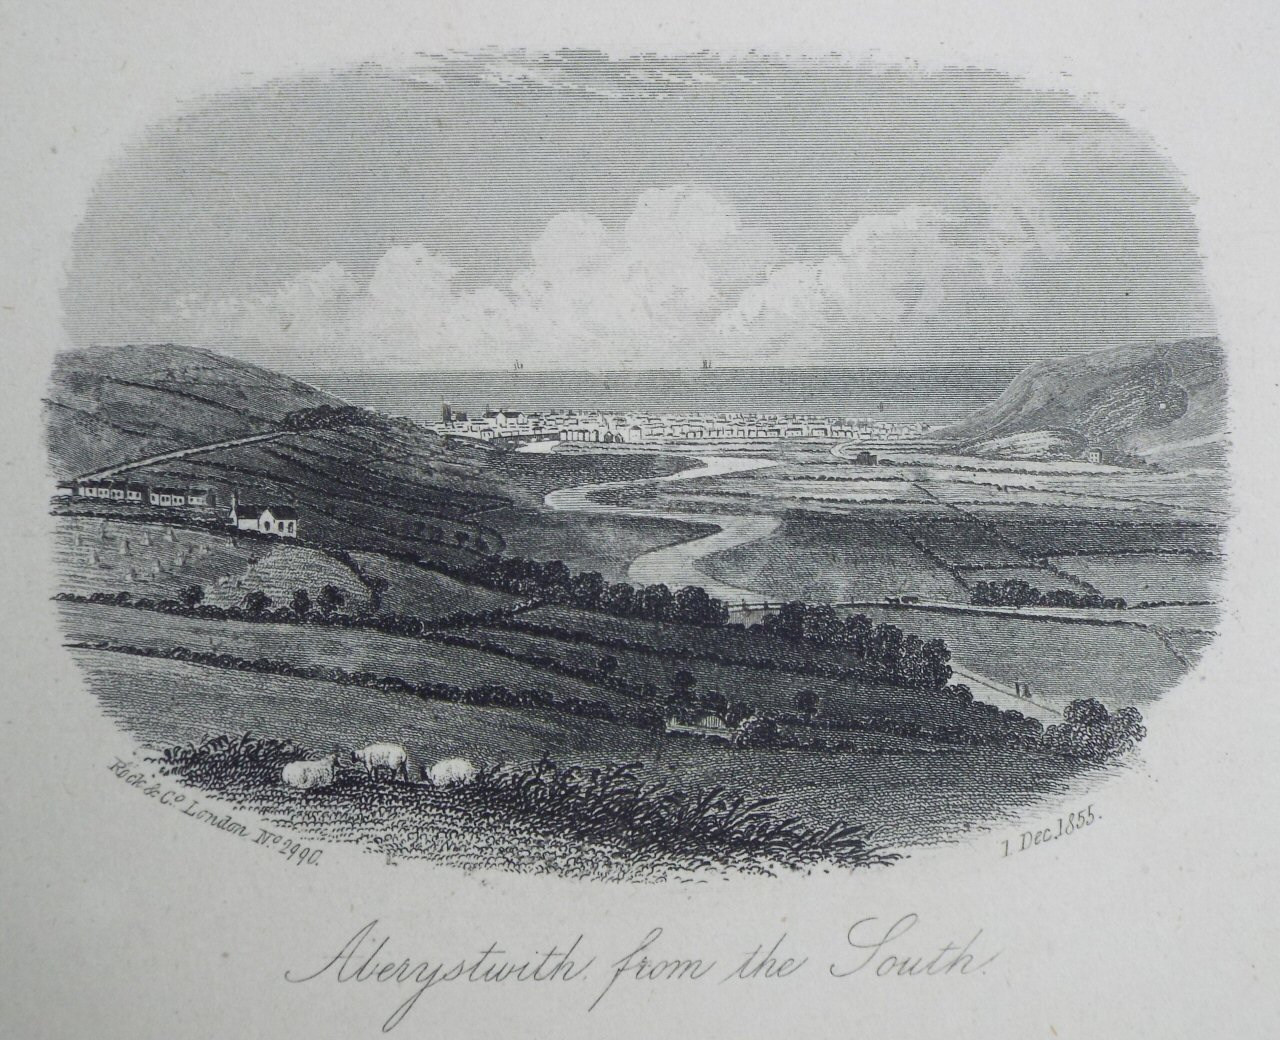 Steel Vignette - Aberystwith, from the South - Rock